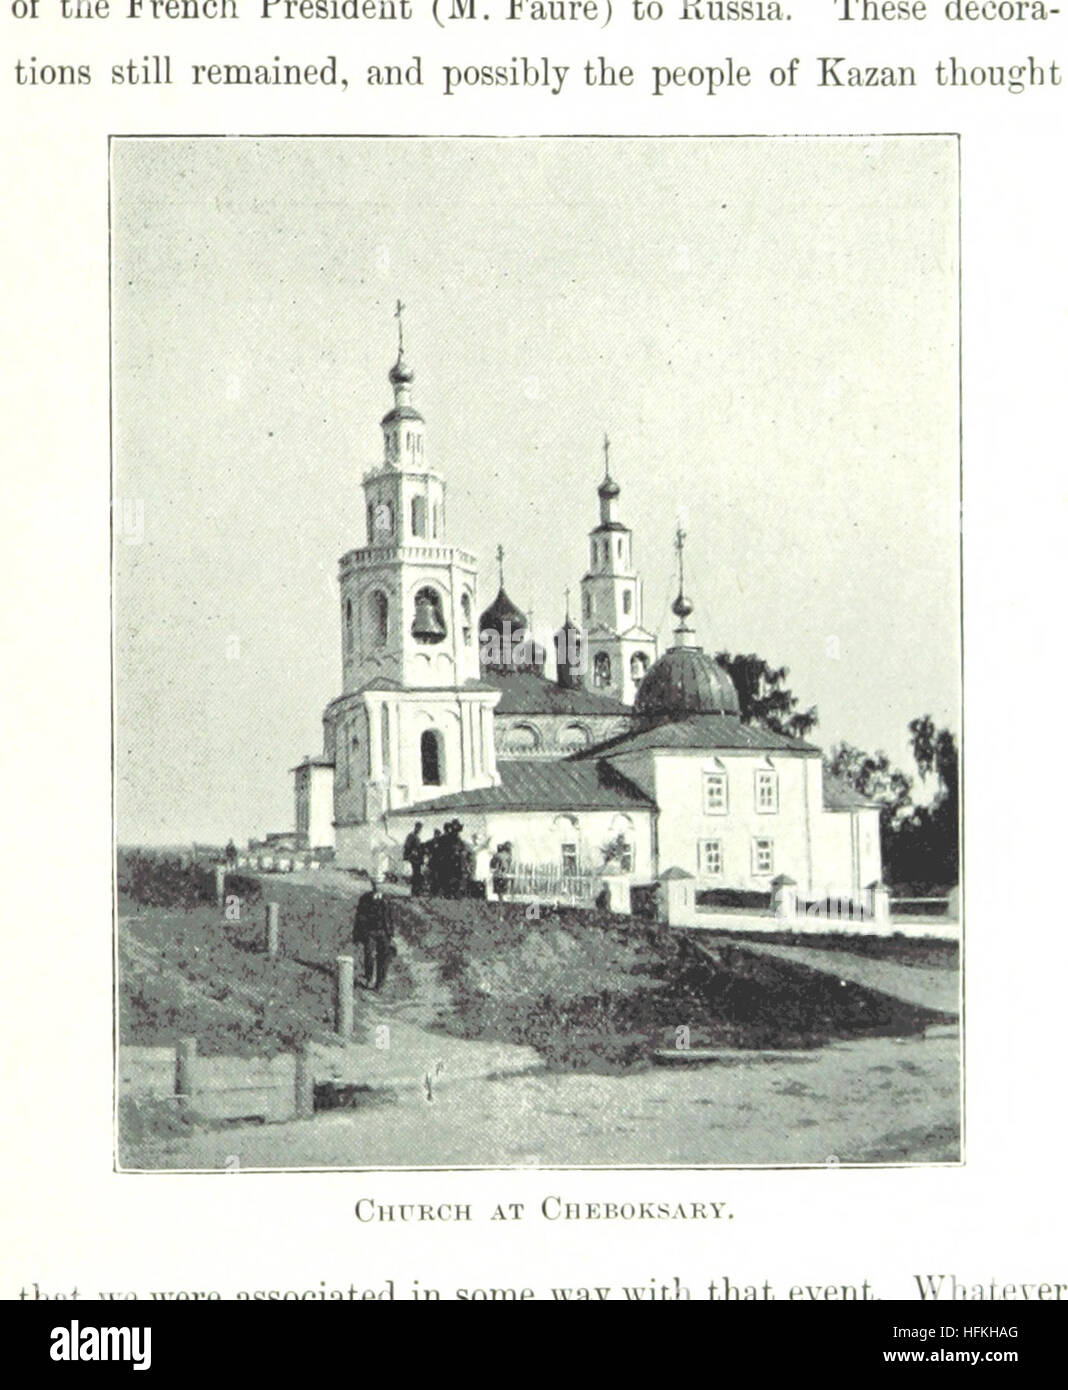 Reminiscences of Russia. The Ural Mountains and adjoining Siberian district in 1897 Image taken from page 89 of 'Reminiscences of Russia The Stock Photo